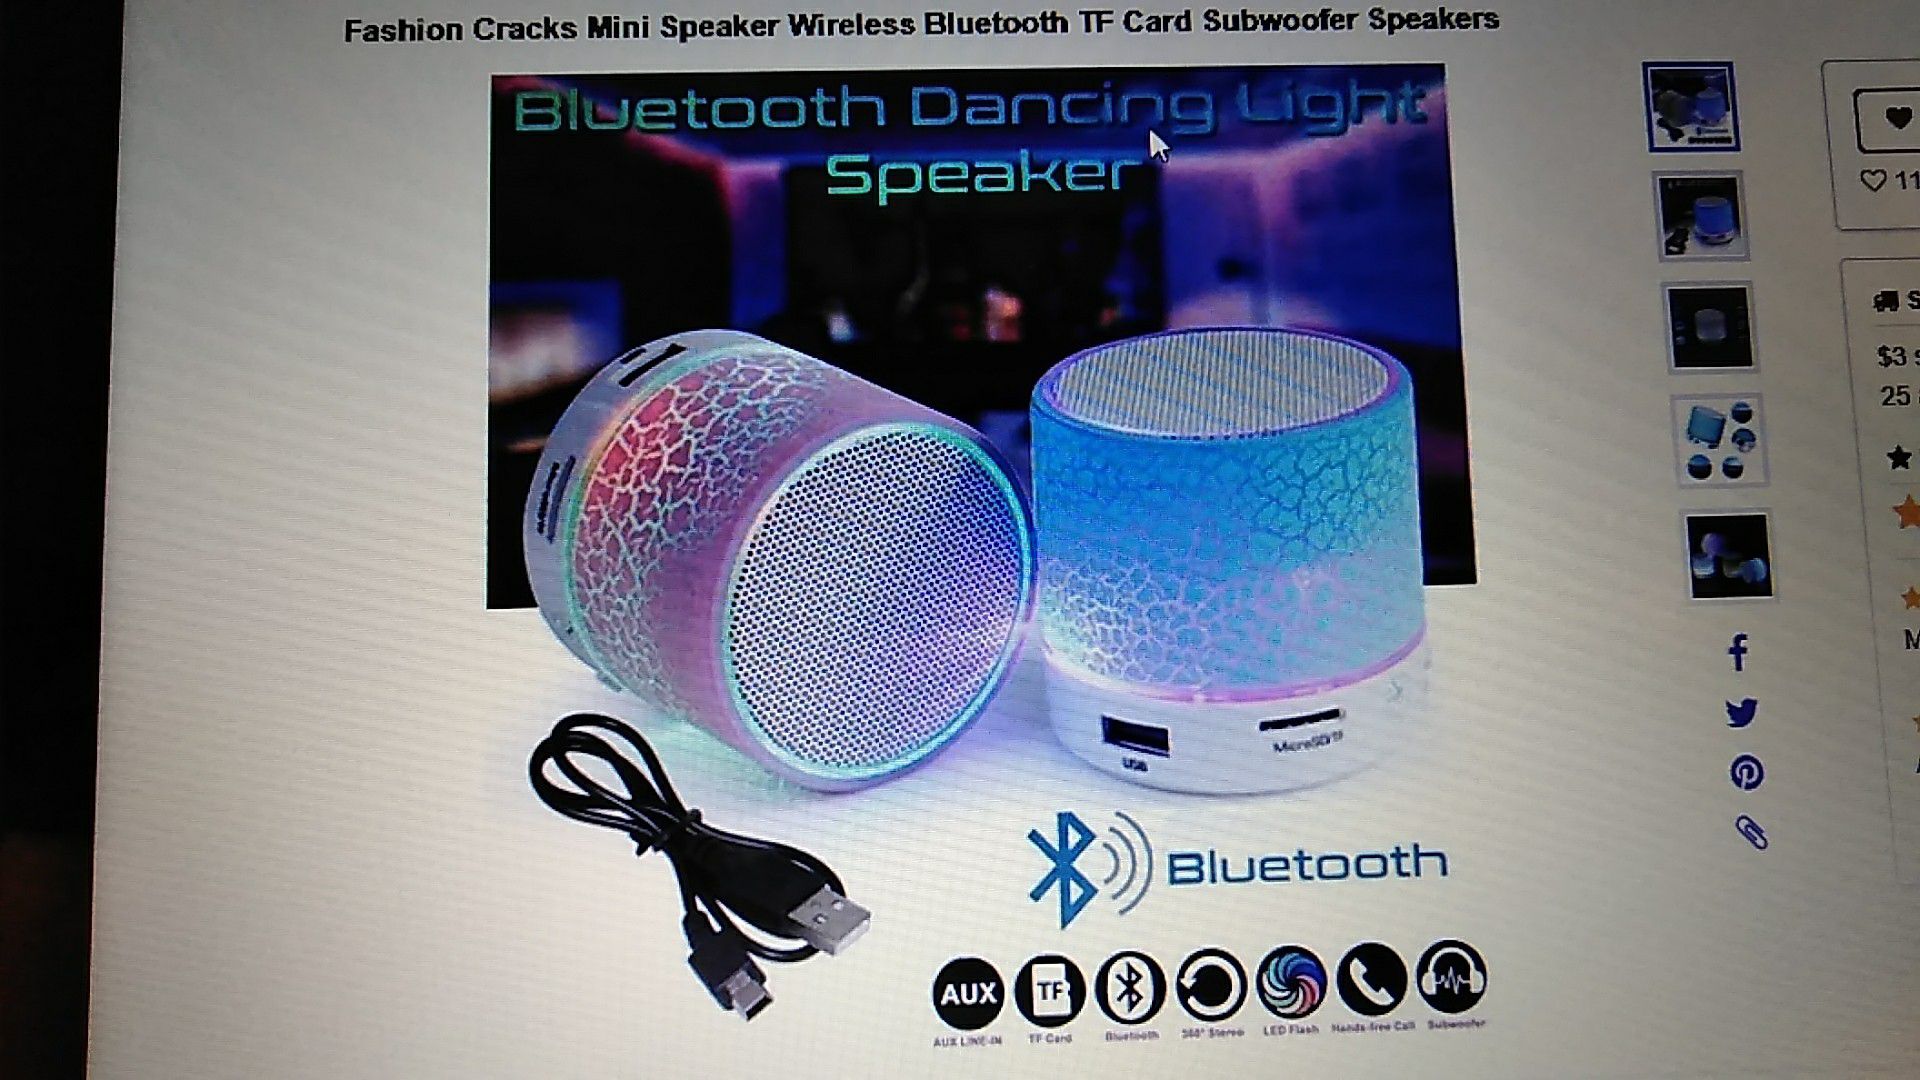 Wireless Bluetooth TF card subwoofer speakers